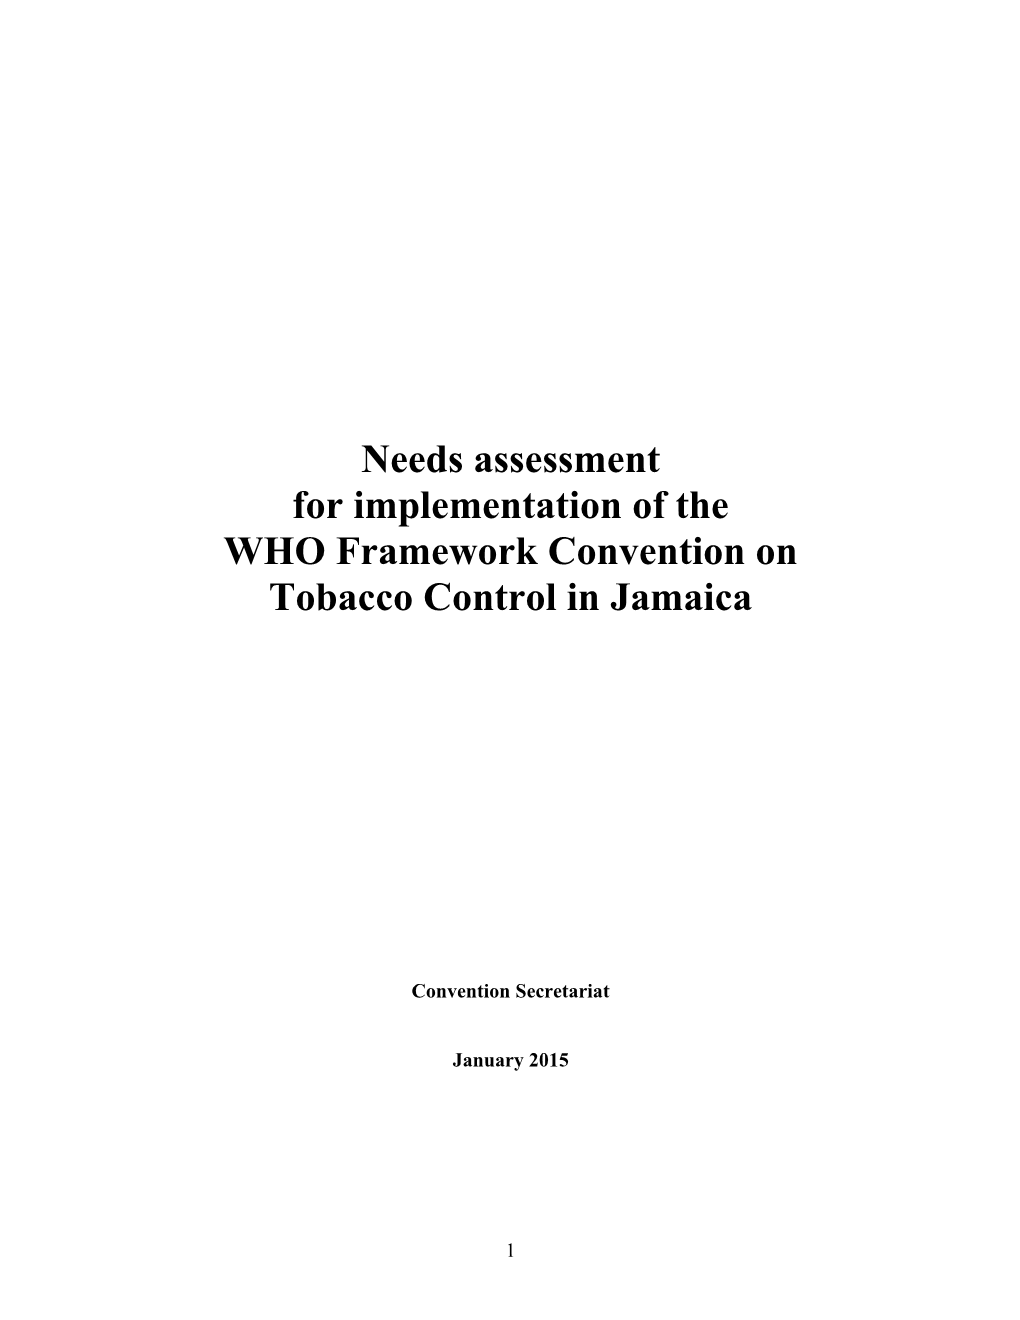 Needs Assessment for Implementation of the WHO Framework Convention on Tobacco Control in Jamaica